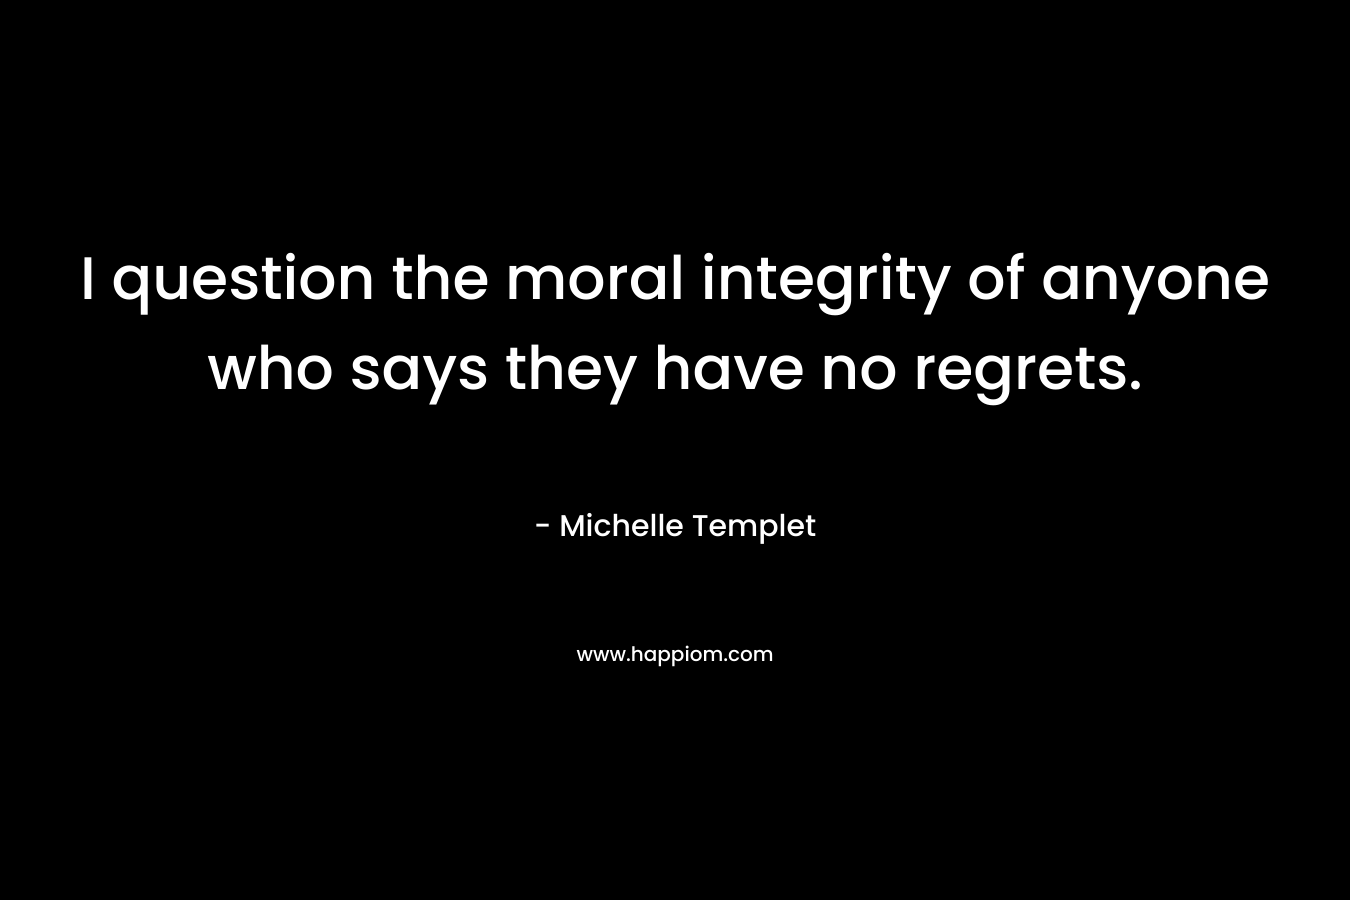 I question the moral integrity of anyone who says they have no regrets.